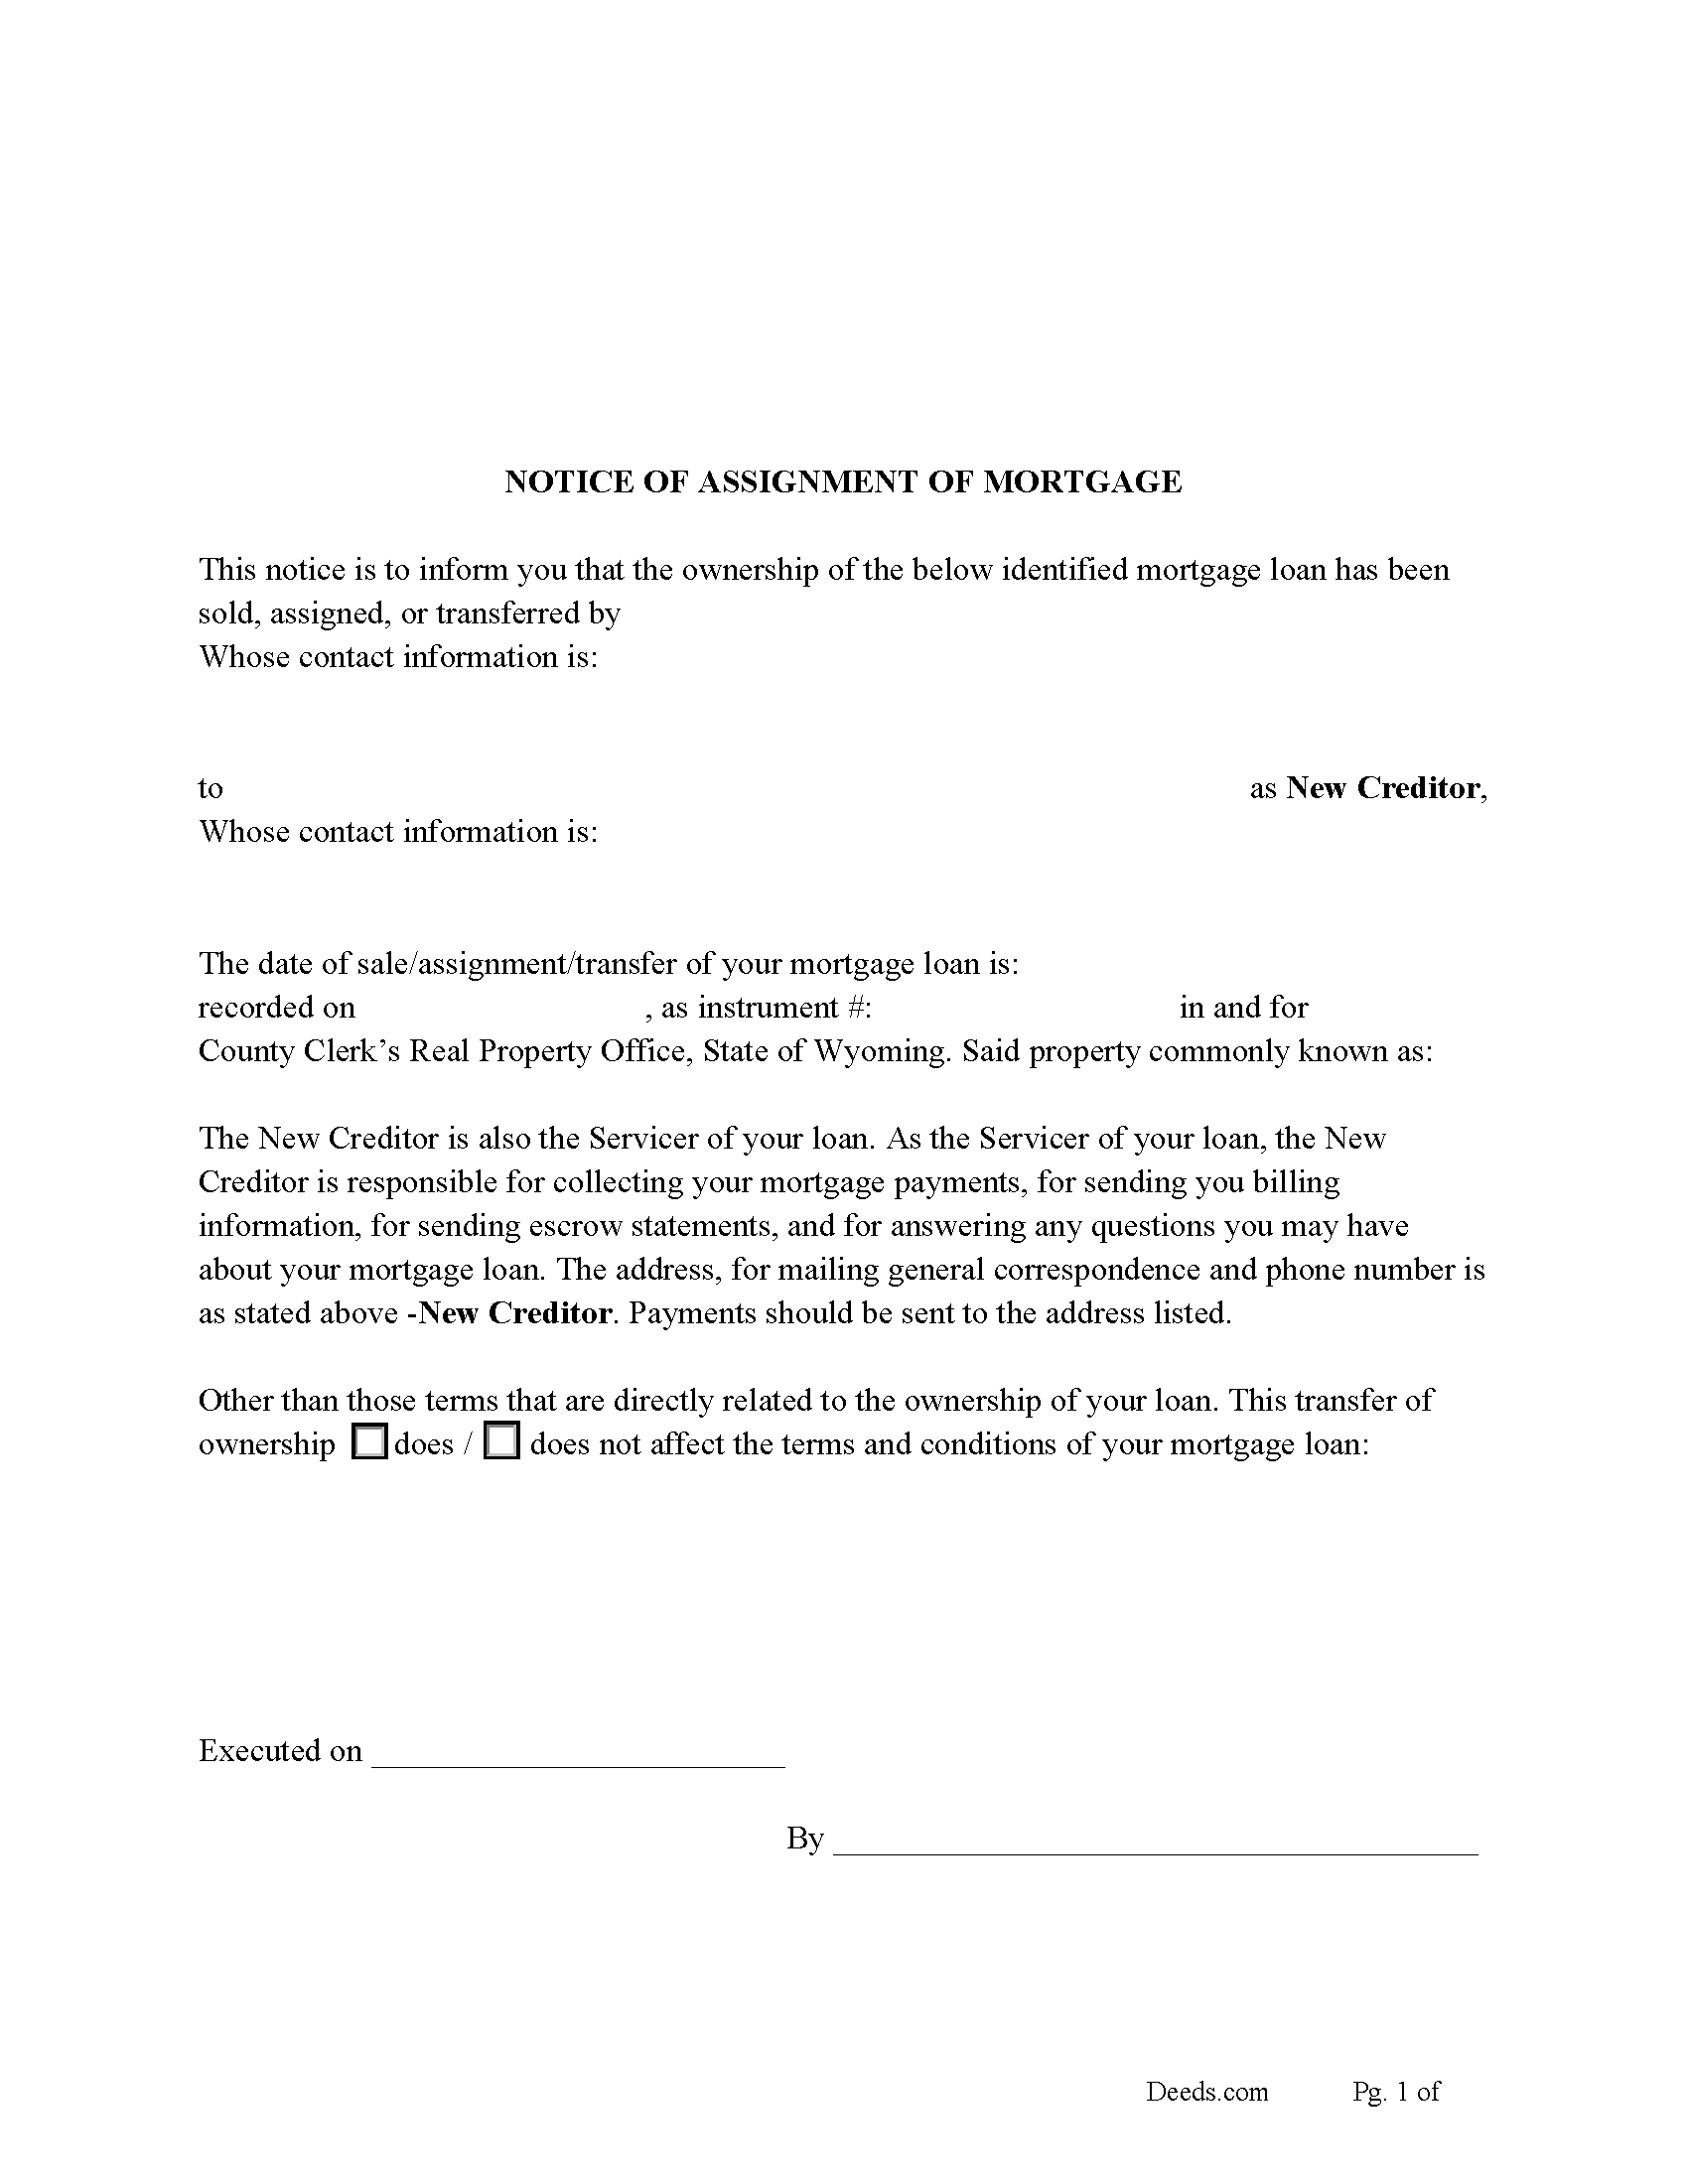 Notice of Assignment of Mortgage Form